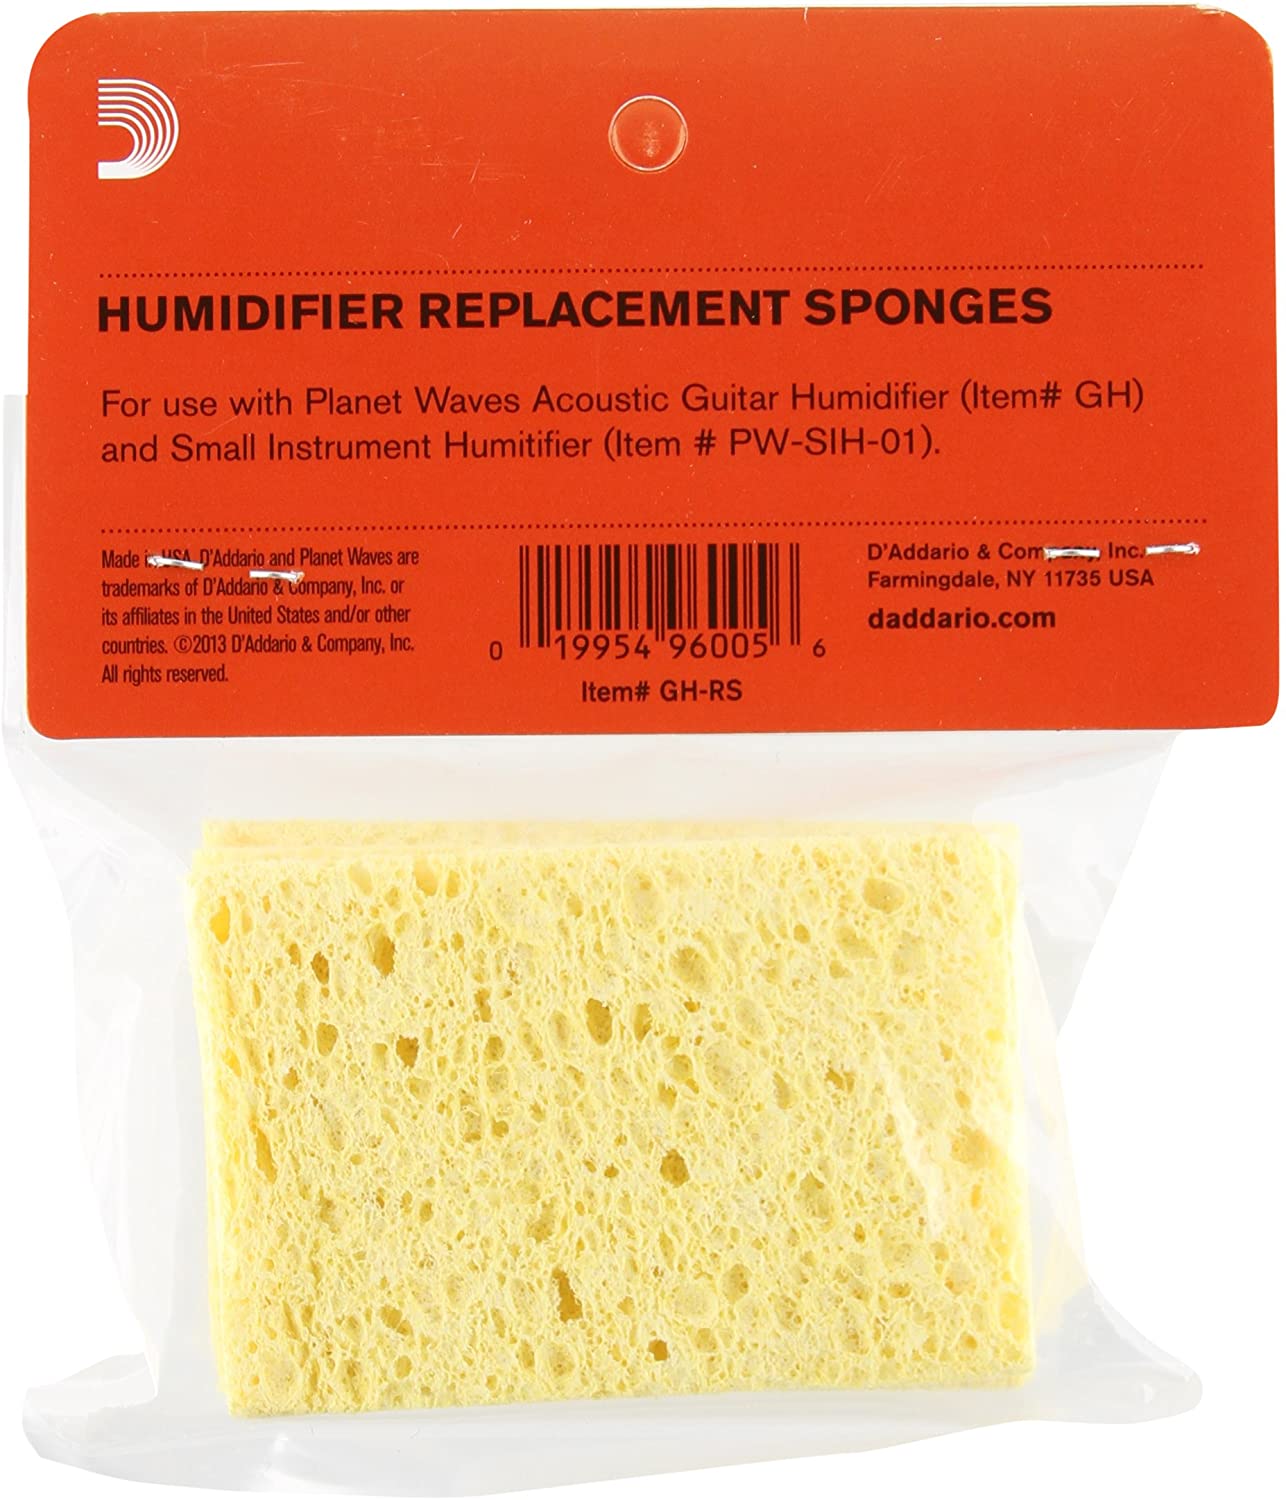 D'Addario Acoustic Guitar Humidifier Replacement Sponges, 3 Pack in action